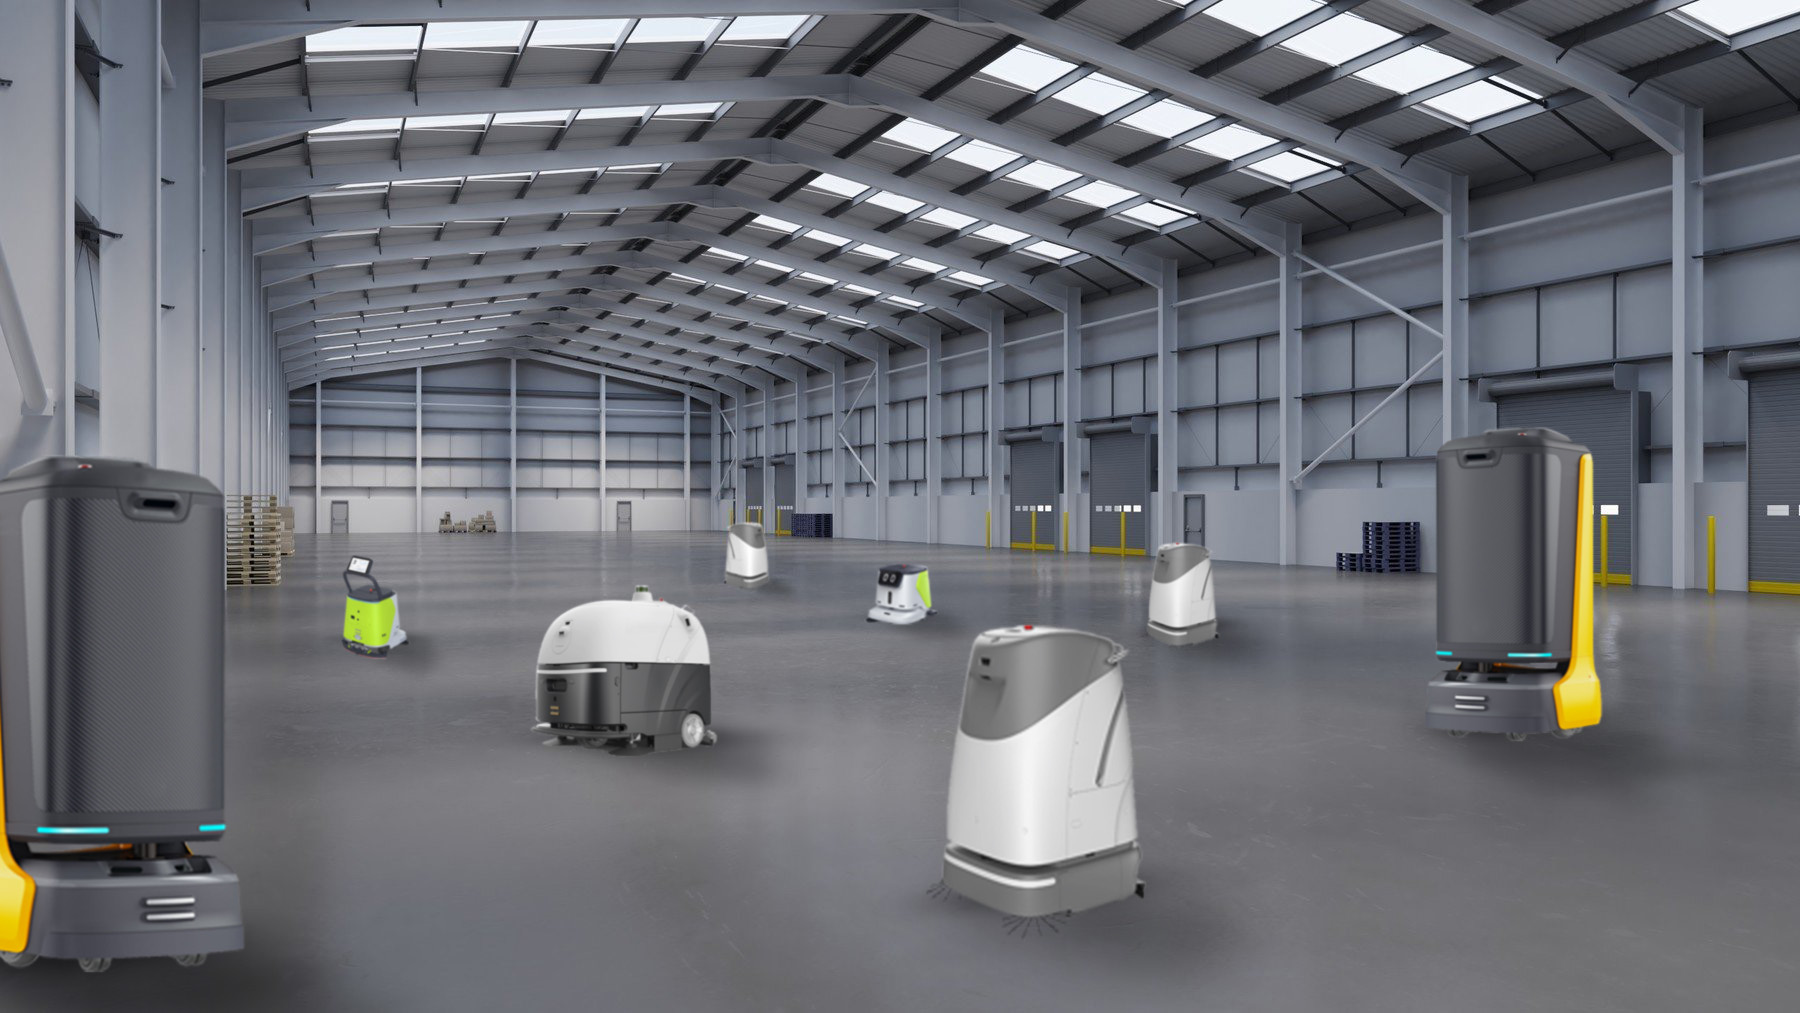 Interior of a warehouse with floor cleaning robots